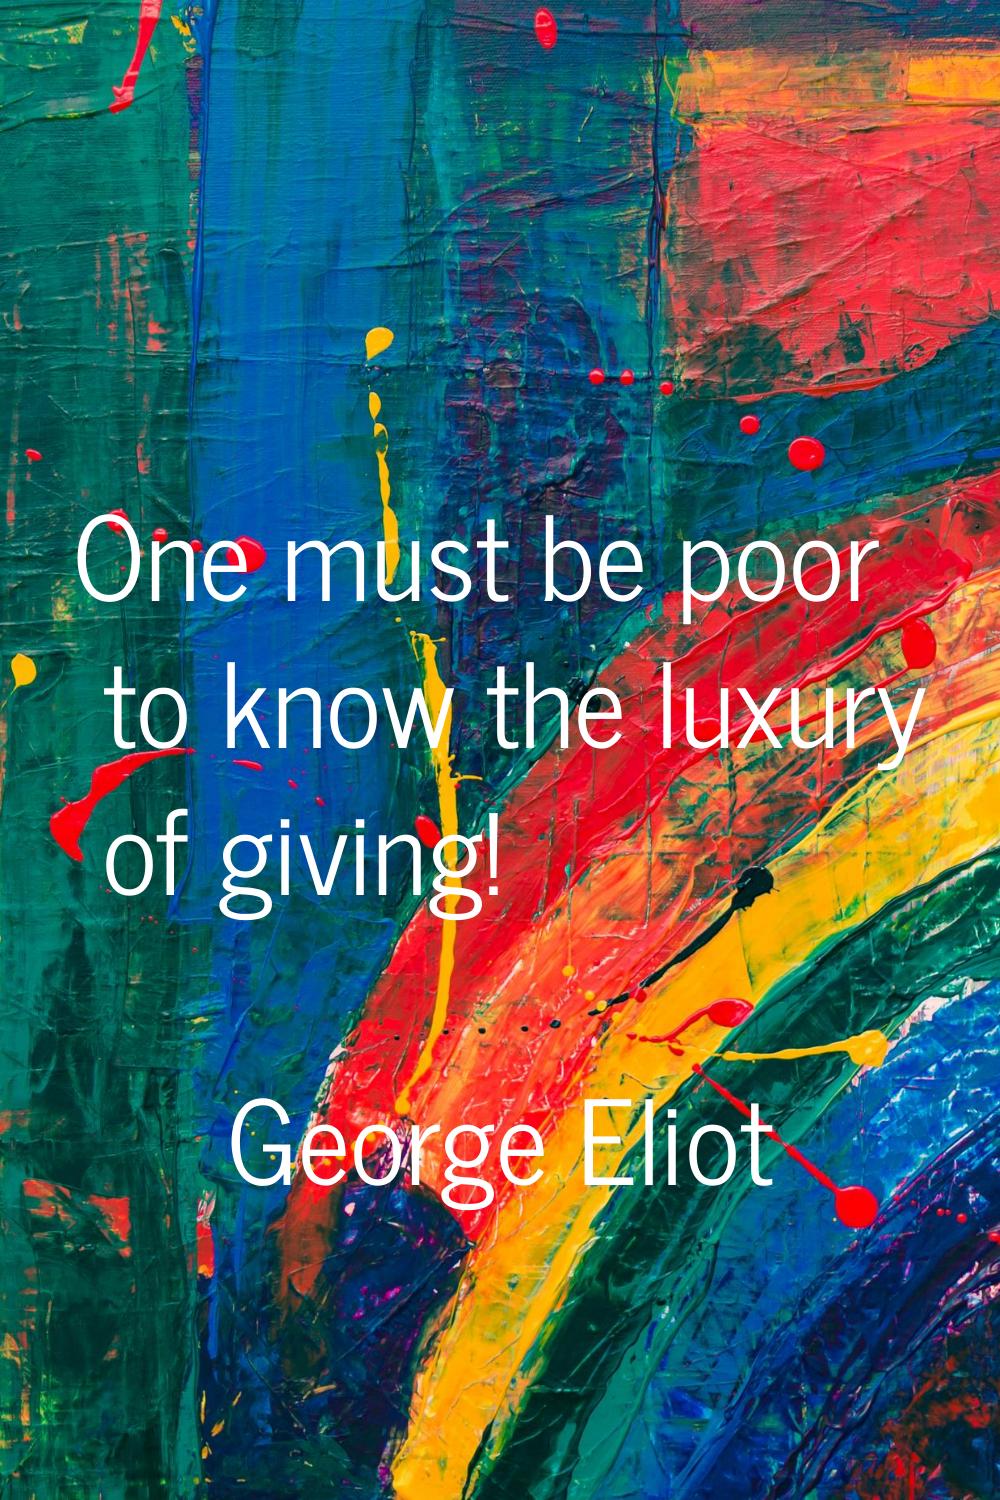 One must be poor to know the luxury of giving!